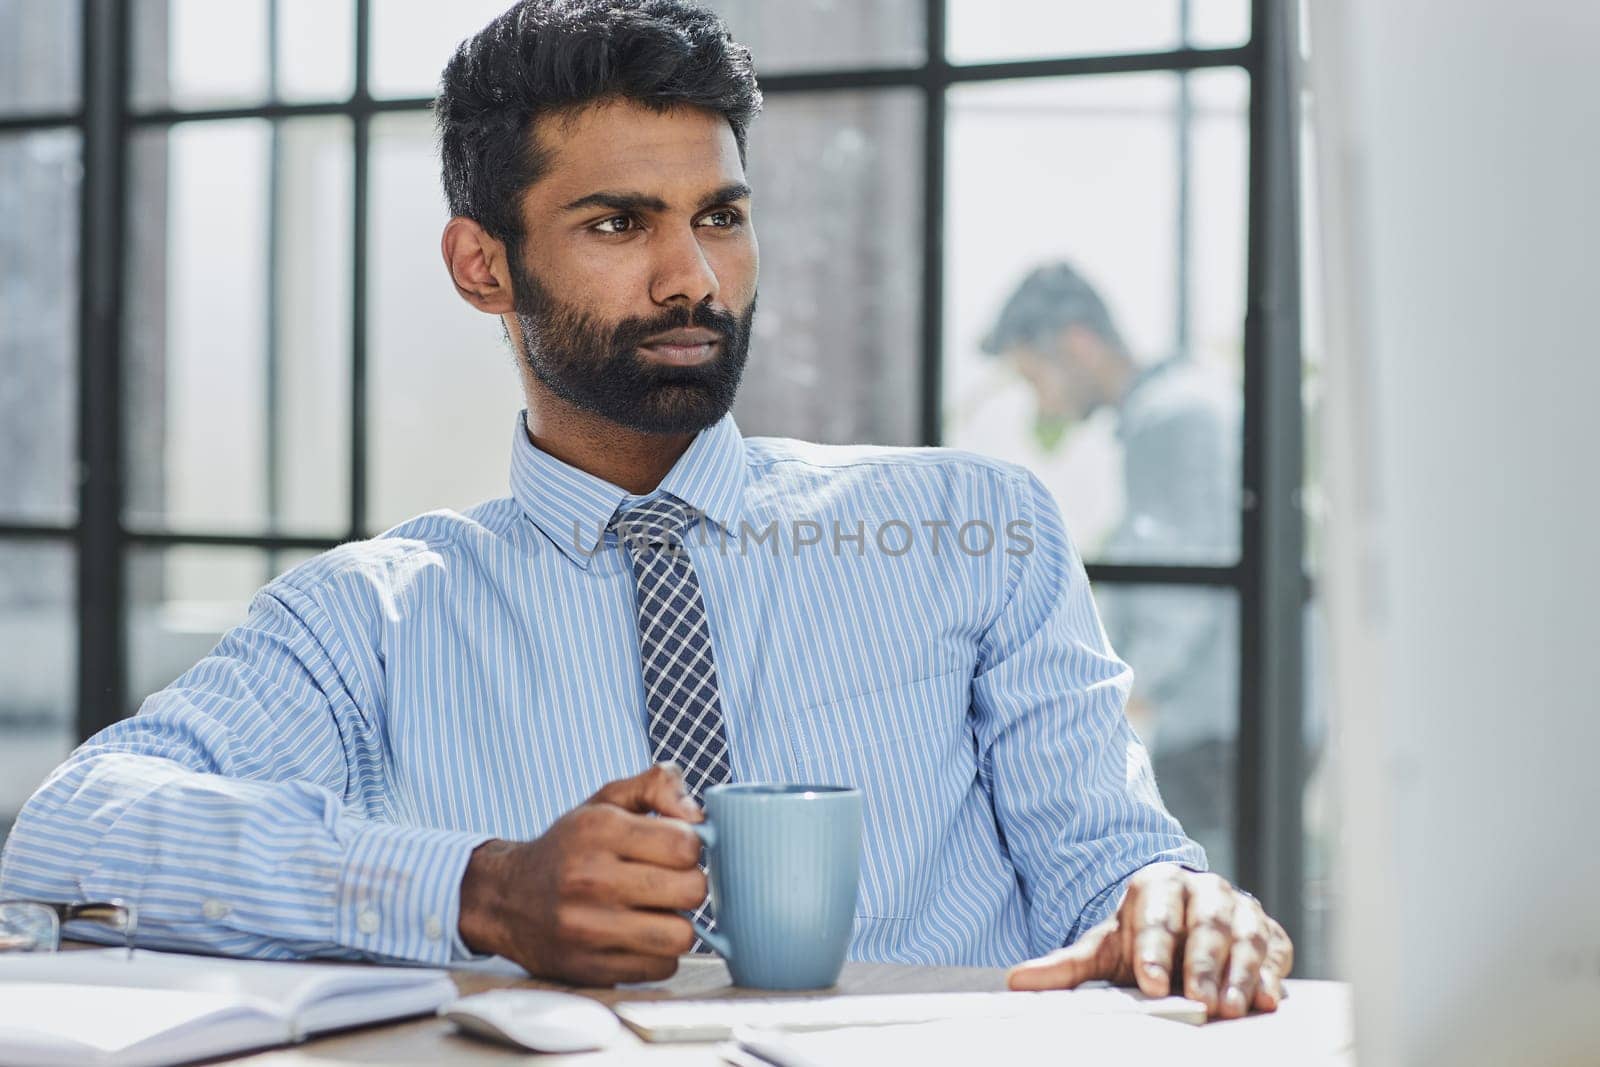 A handsome young man is sitting by the window in the office, drinking coffee while working on a laptop.